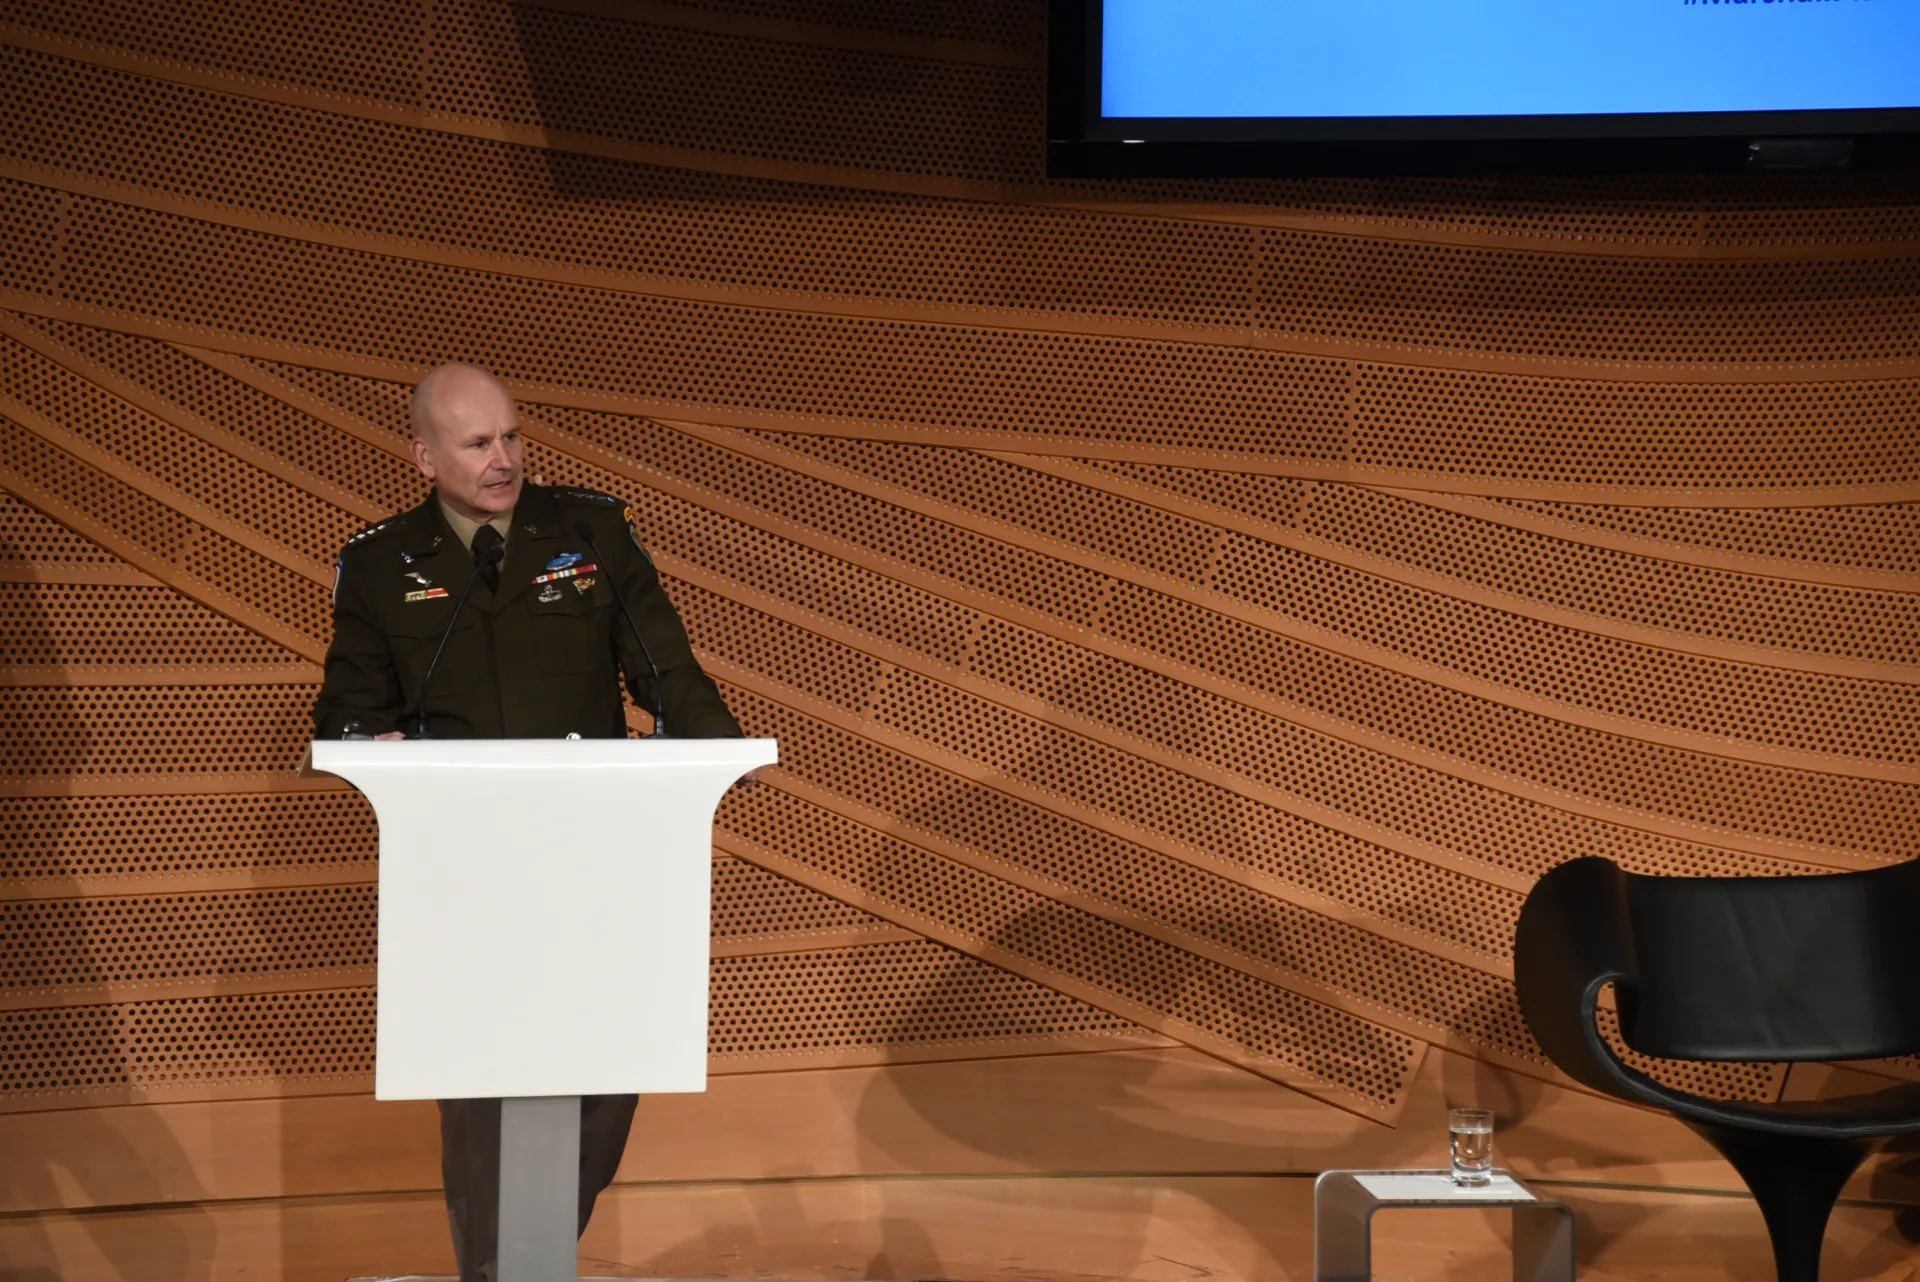 General Christopher G. Cavoli giving keynote speech at anniversary conference in Berlin, March 2023